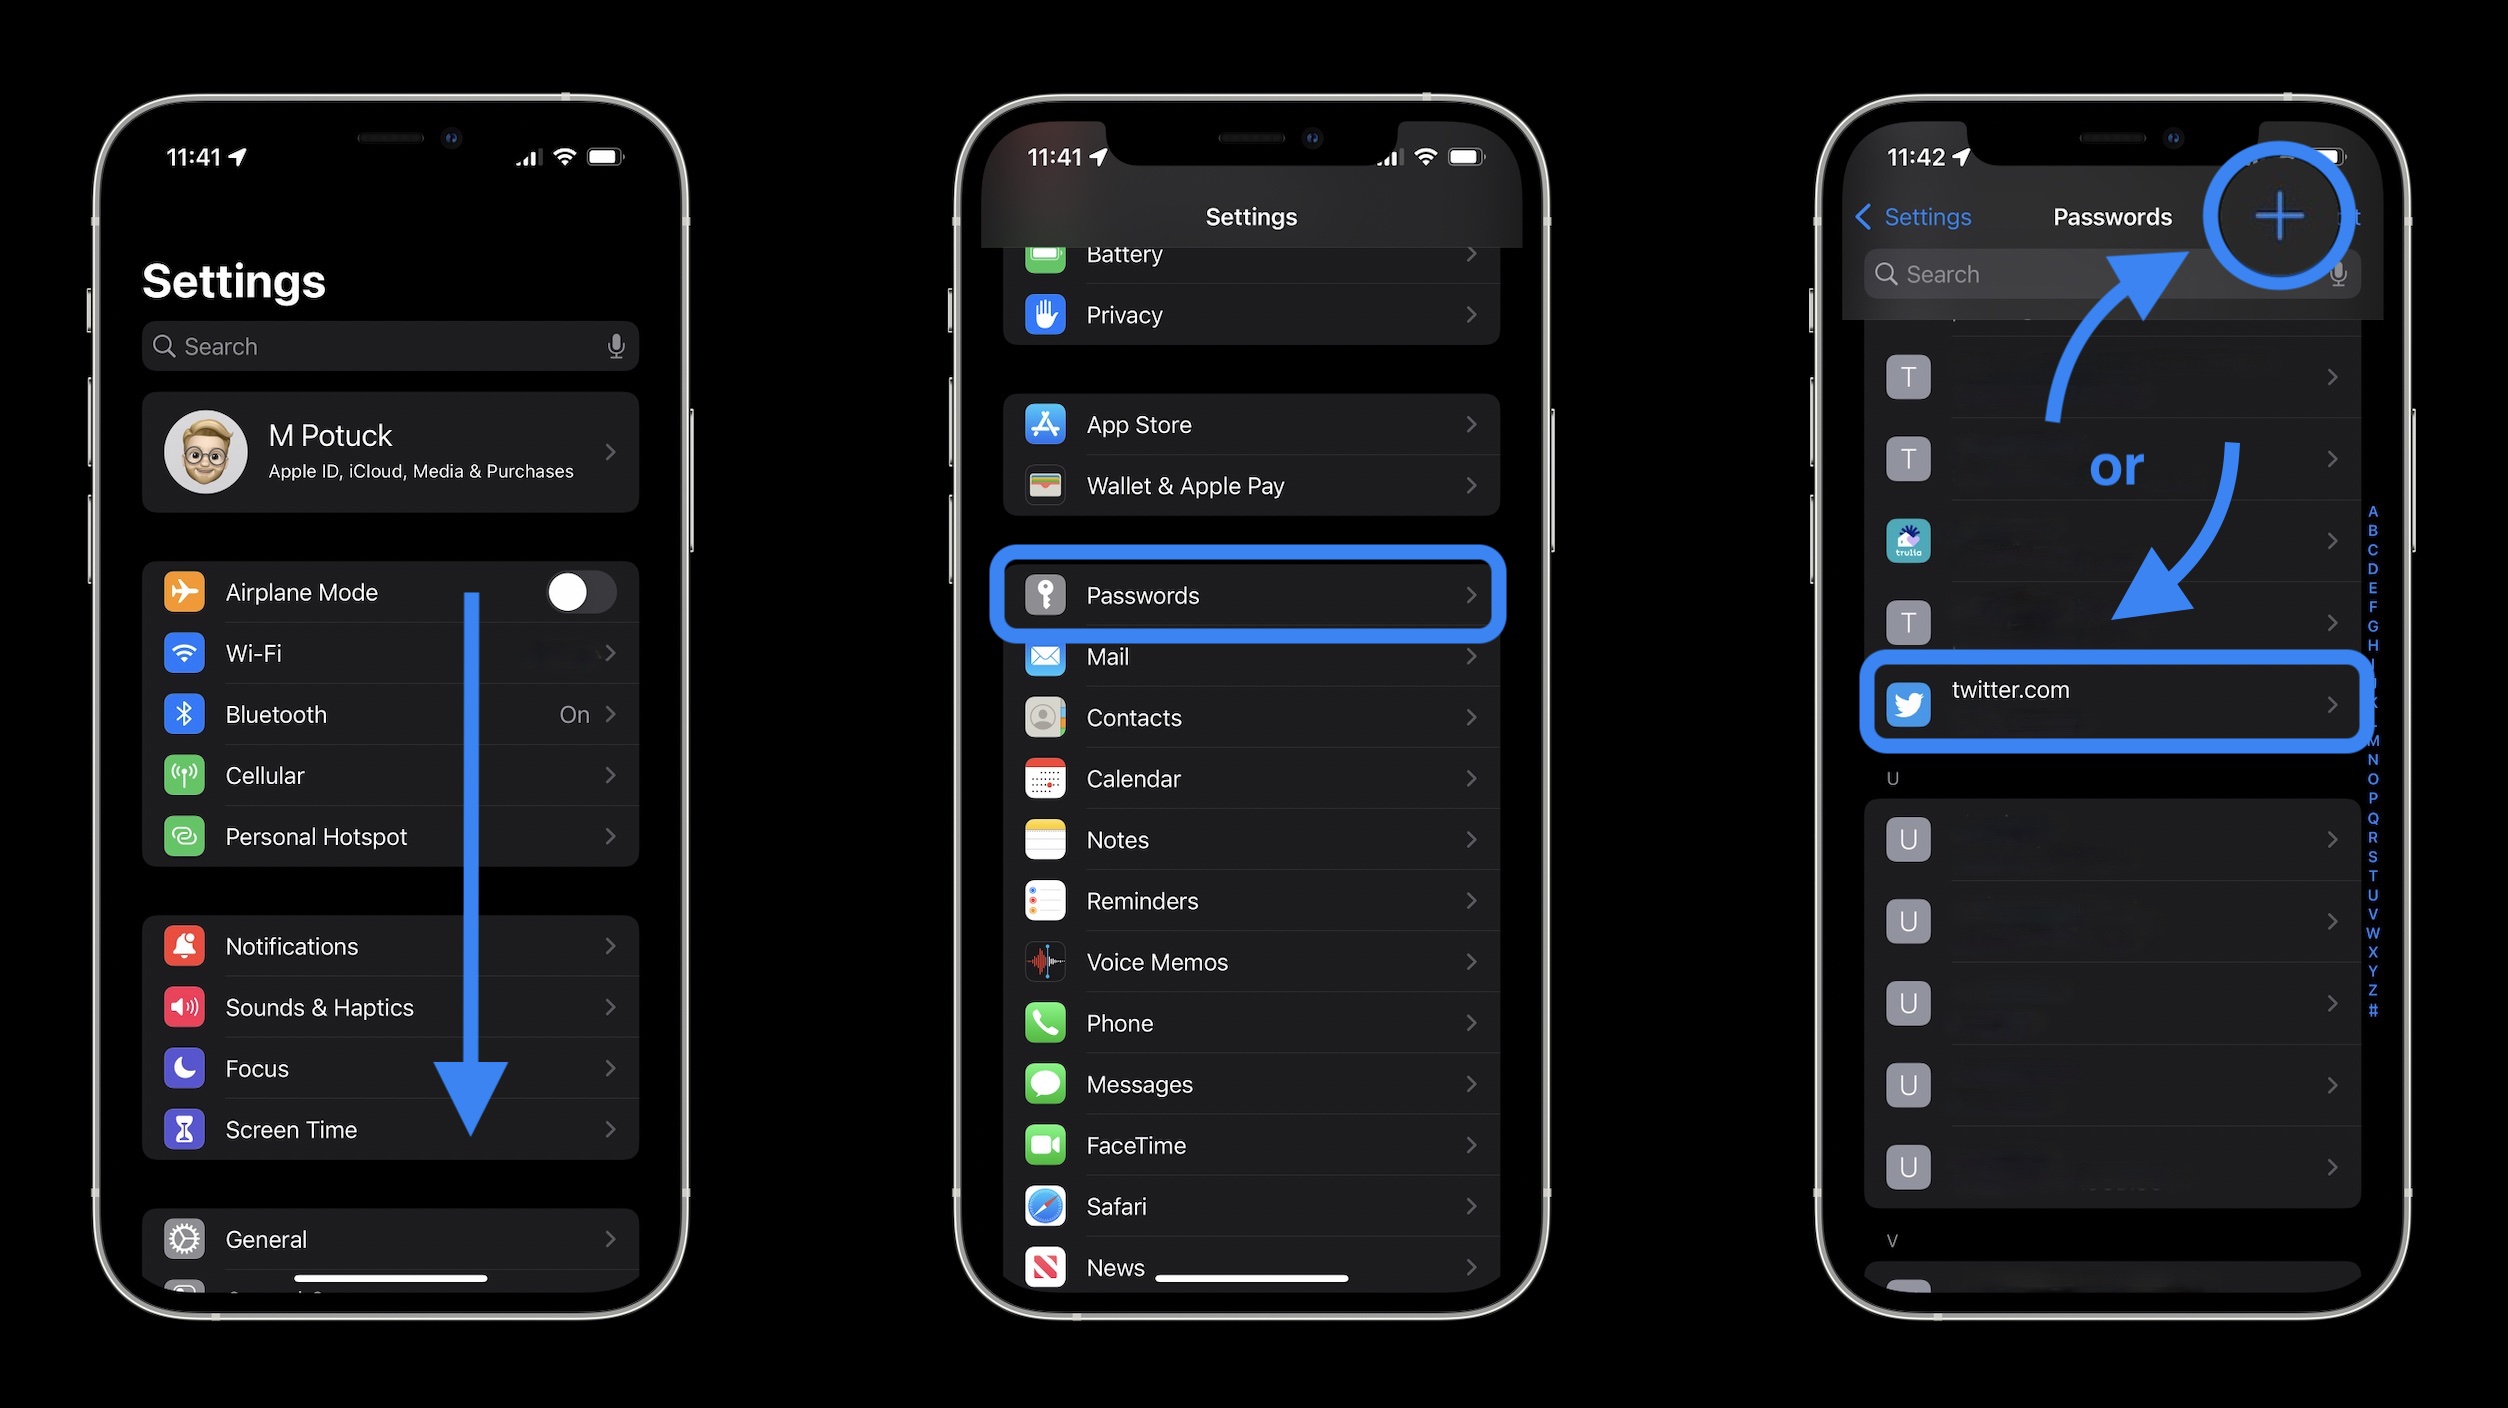 How to set up iOS 15 2FA code generator and autofill - iOS Settings app > Passwords > Create new or select existing login